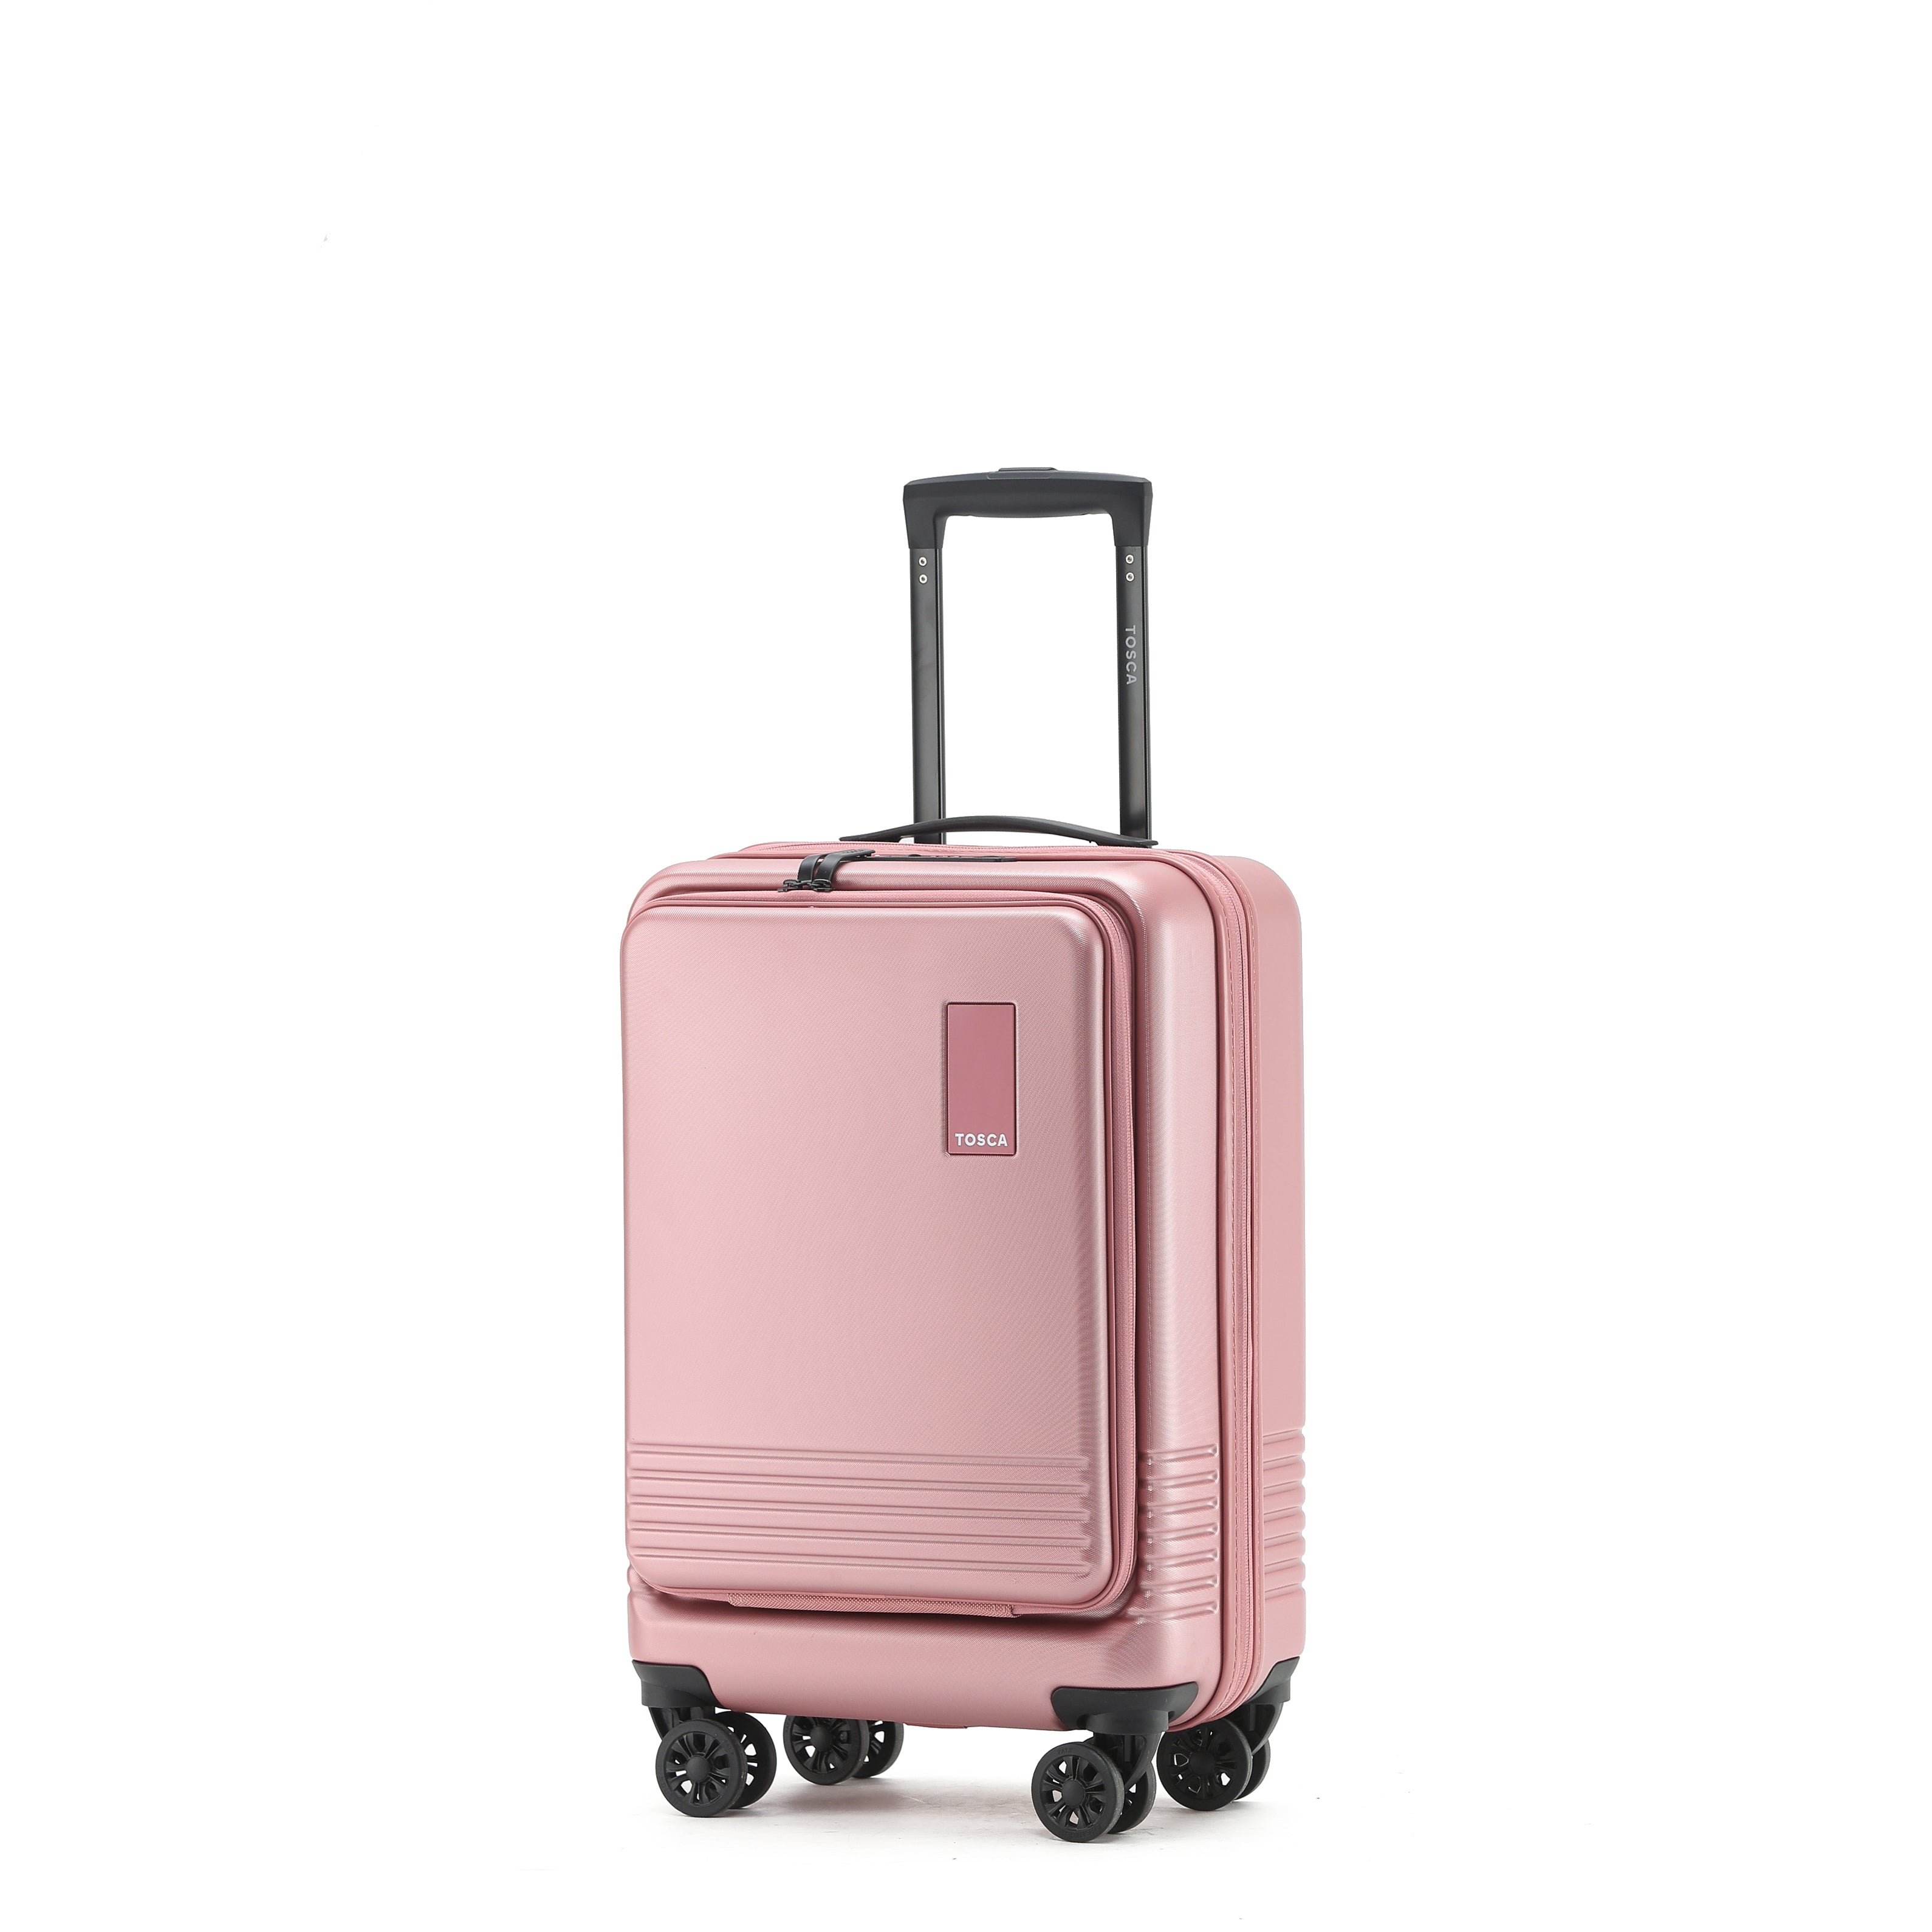 Tosca - TCA644 Horizon Front lid opening Set of 3 suitcases - Dusty Rose-9